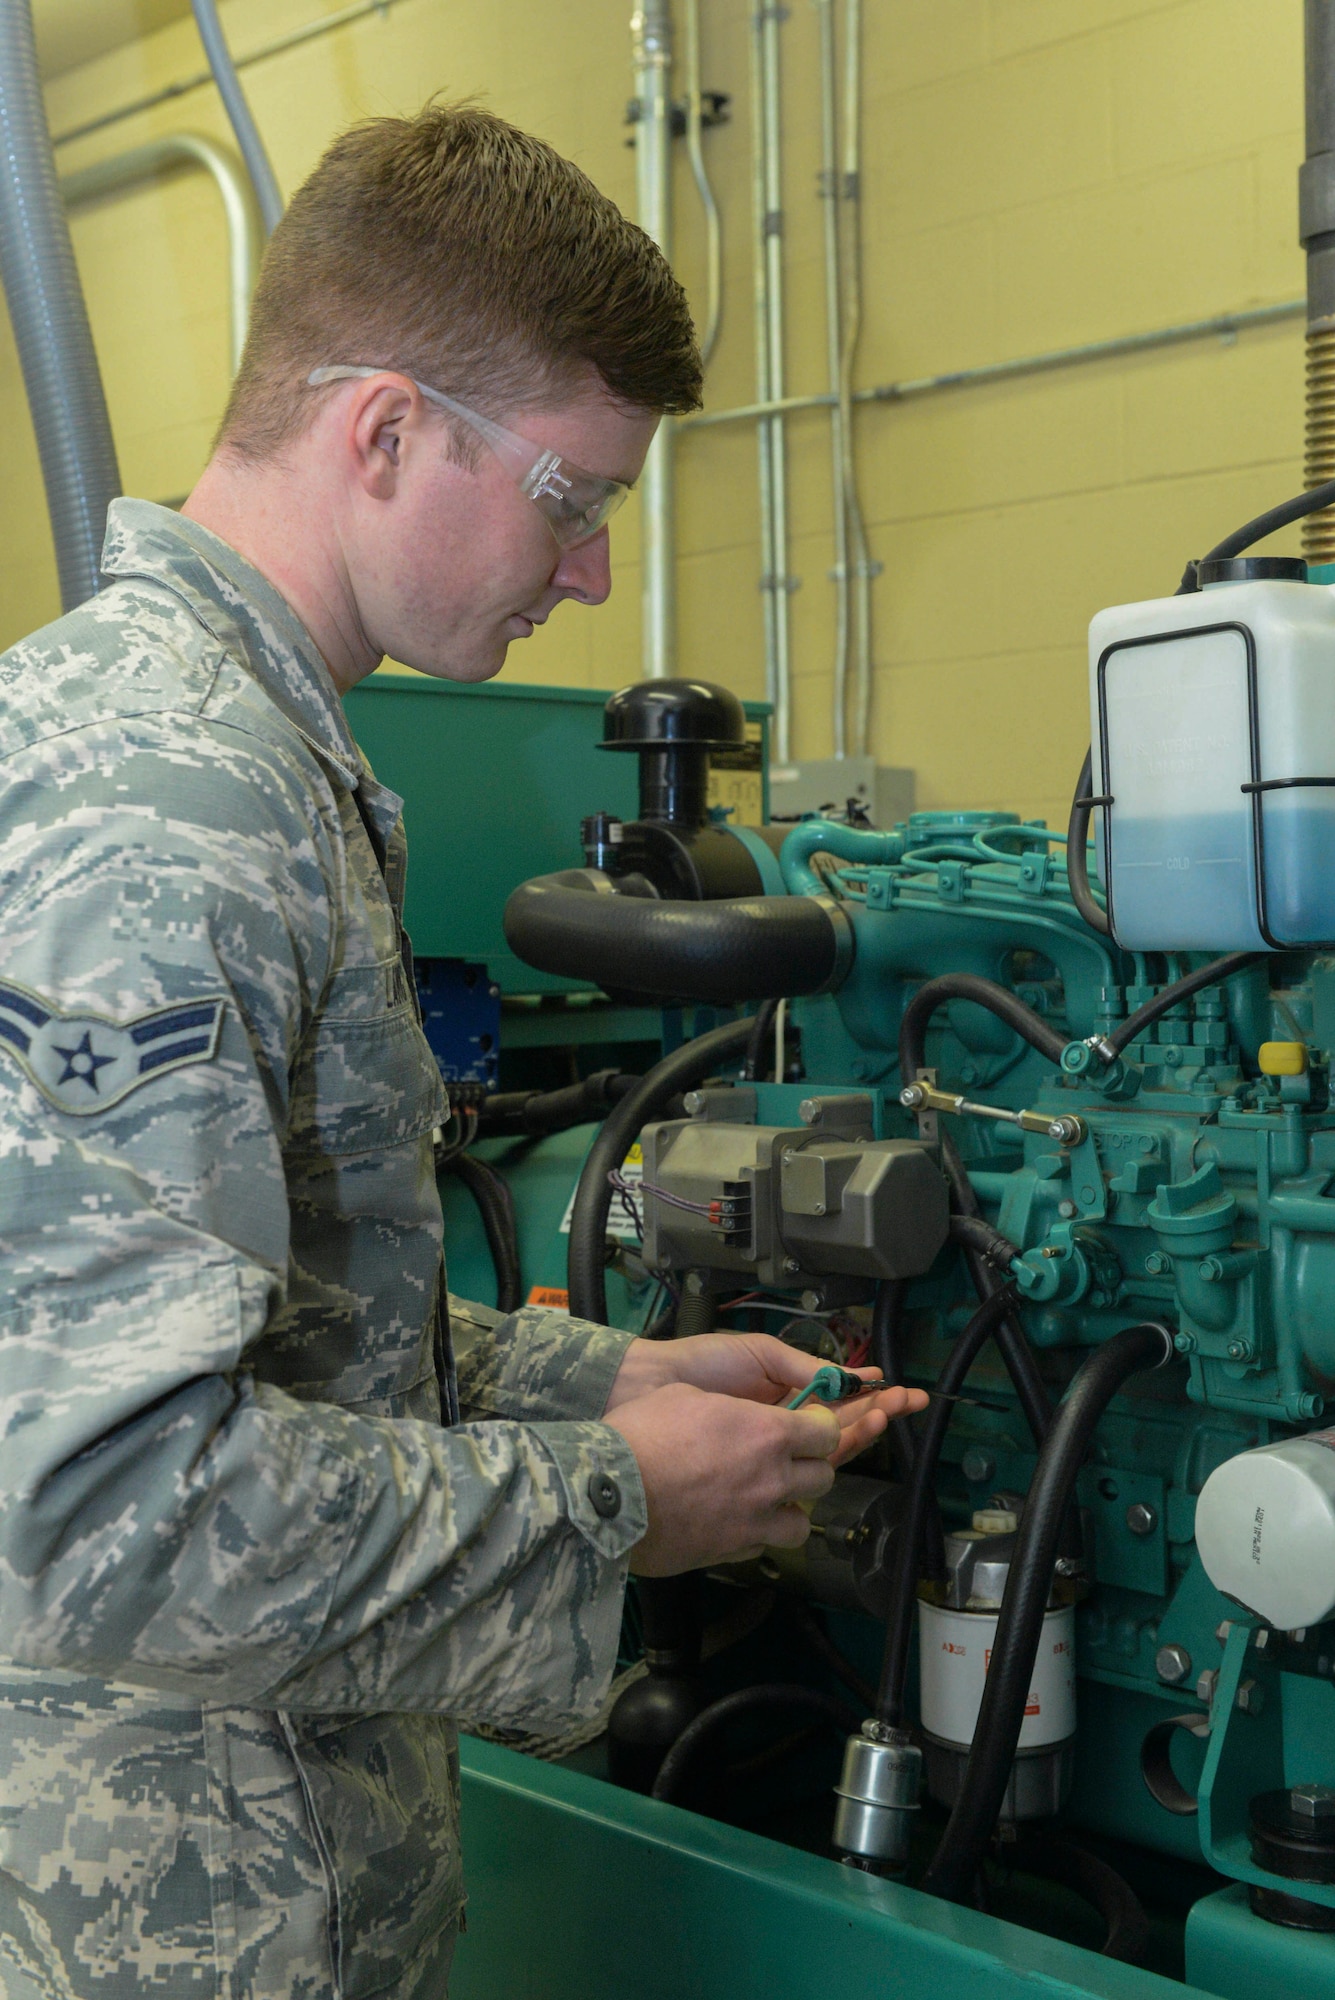 Airman 1st Class Jacob Lang, an electrical power production apprentice assigned to the 5th Civil Engineer Squadron, checks the oil of a generator at Minot Air Force Base, N.D., Sept. 12, 2016. Generators are run monthly to ensure quality and that it can handle the power load required. (U.S. Air Force photo/Airman 1st Class Jessica Weissman)